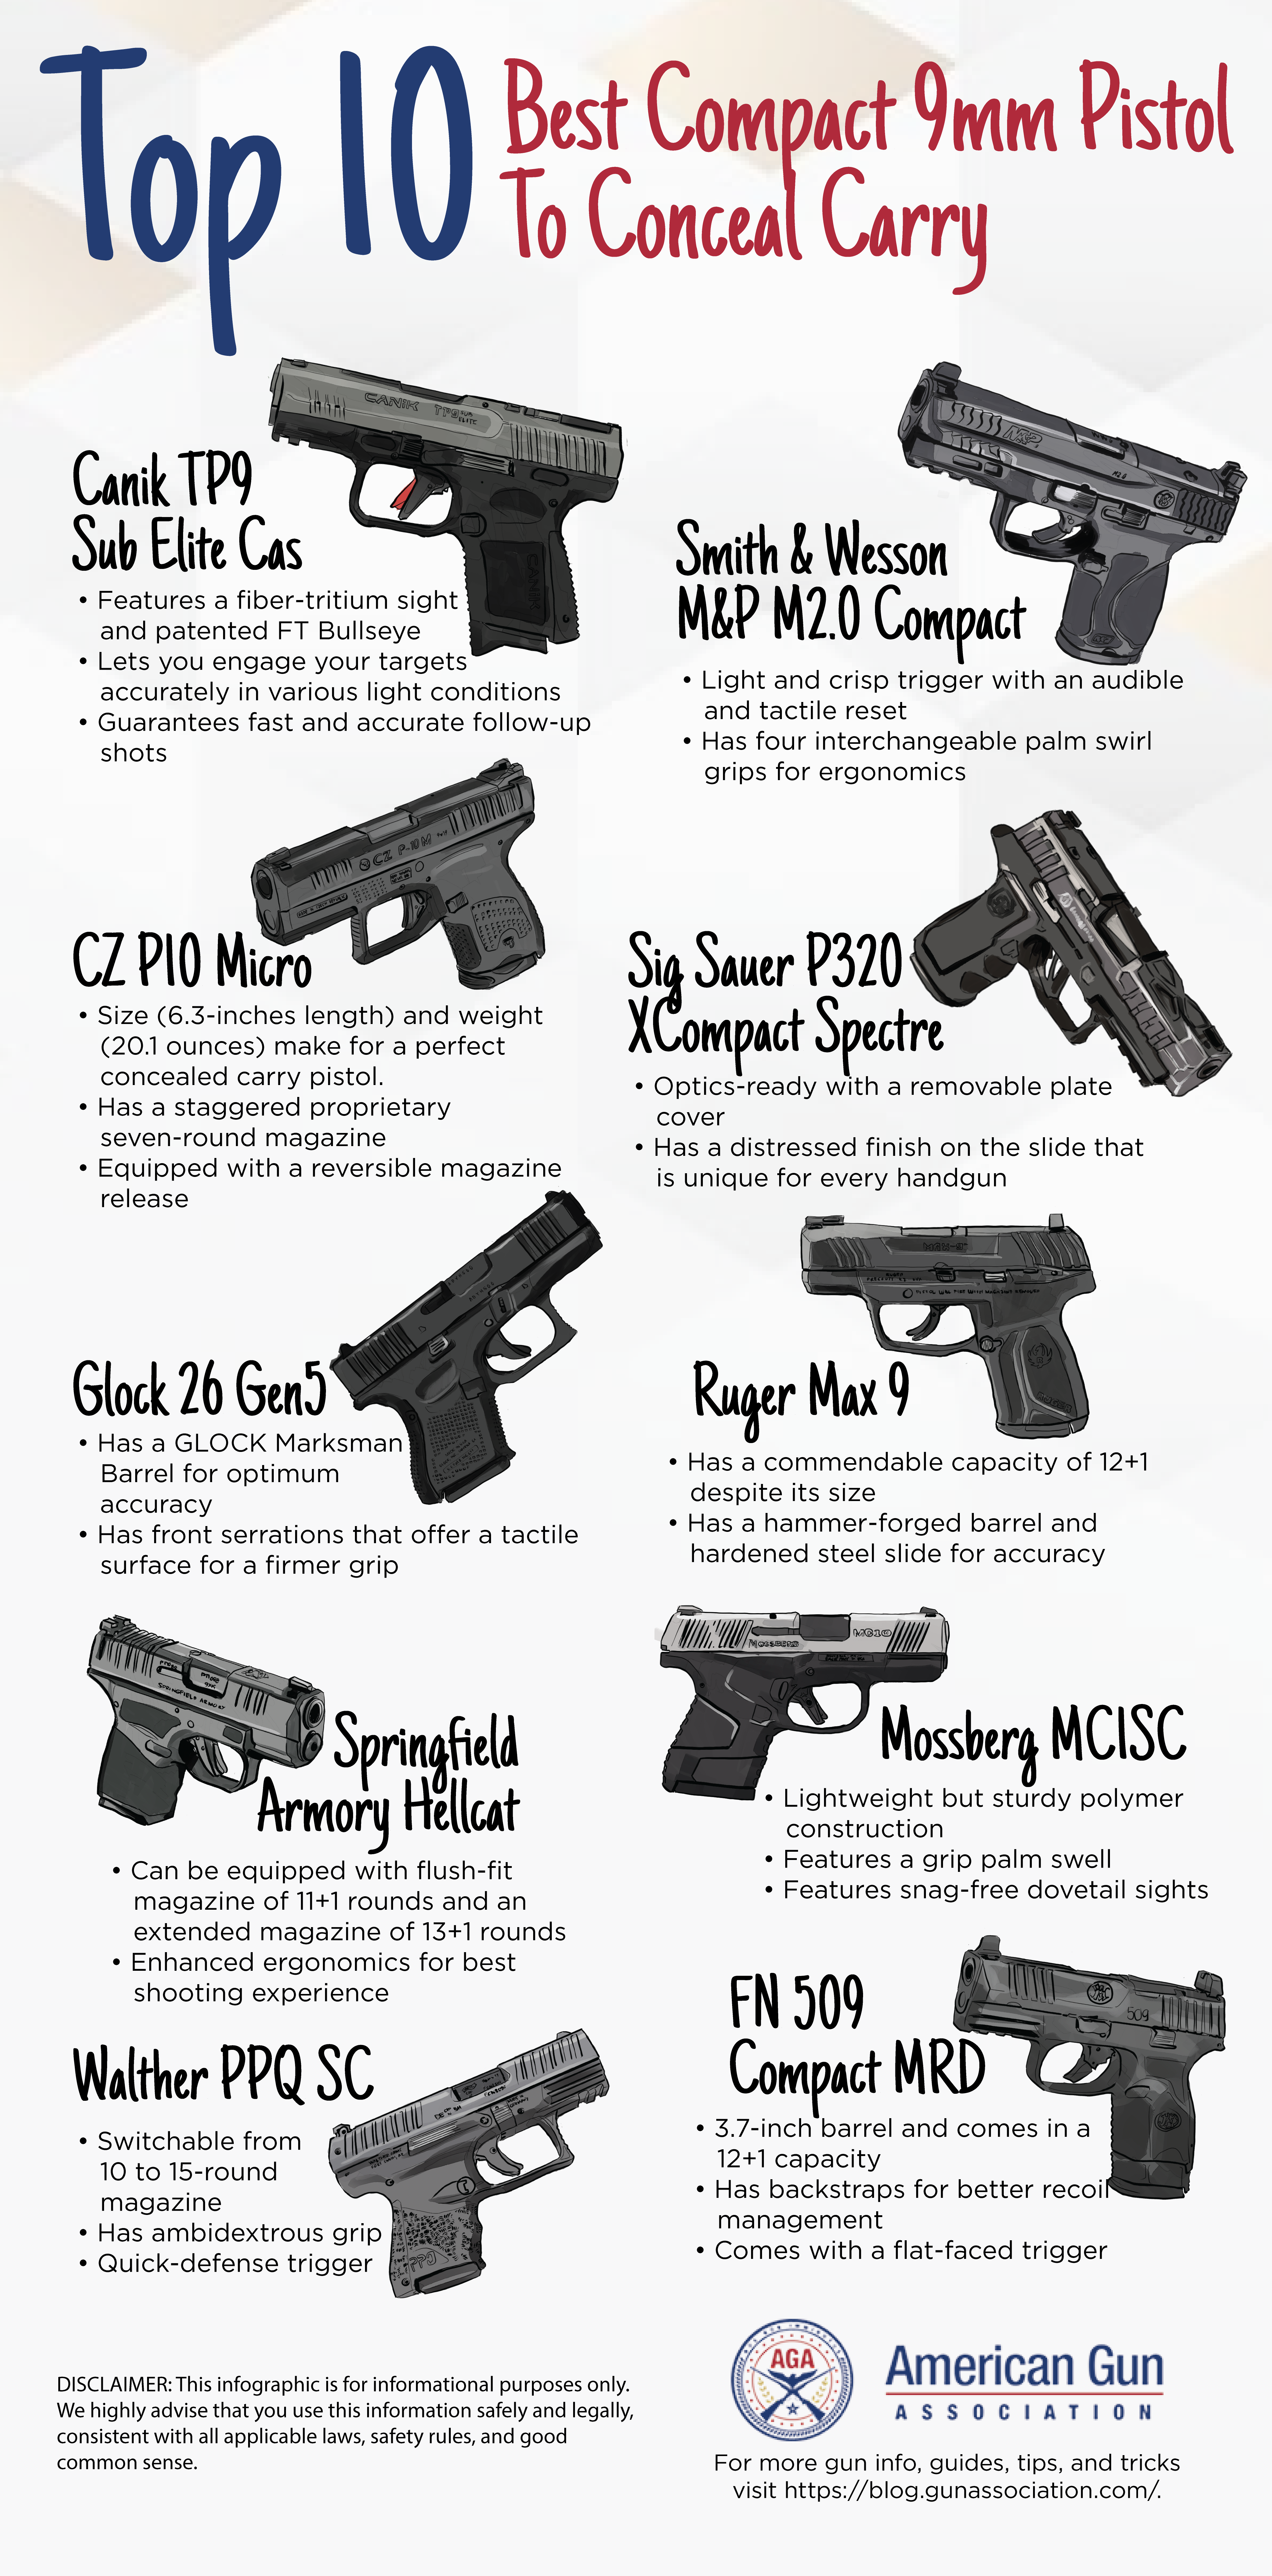 Top 10 Best Compact 9mm Pistol to Conceal Carry